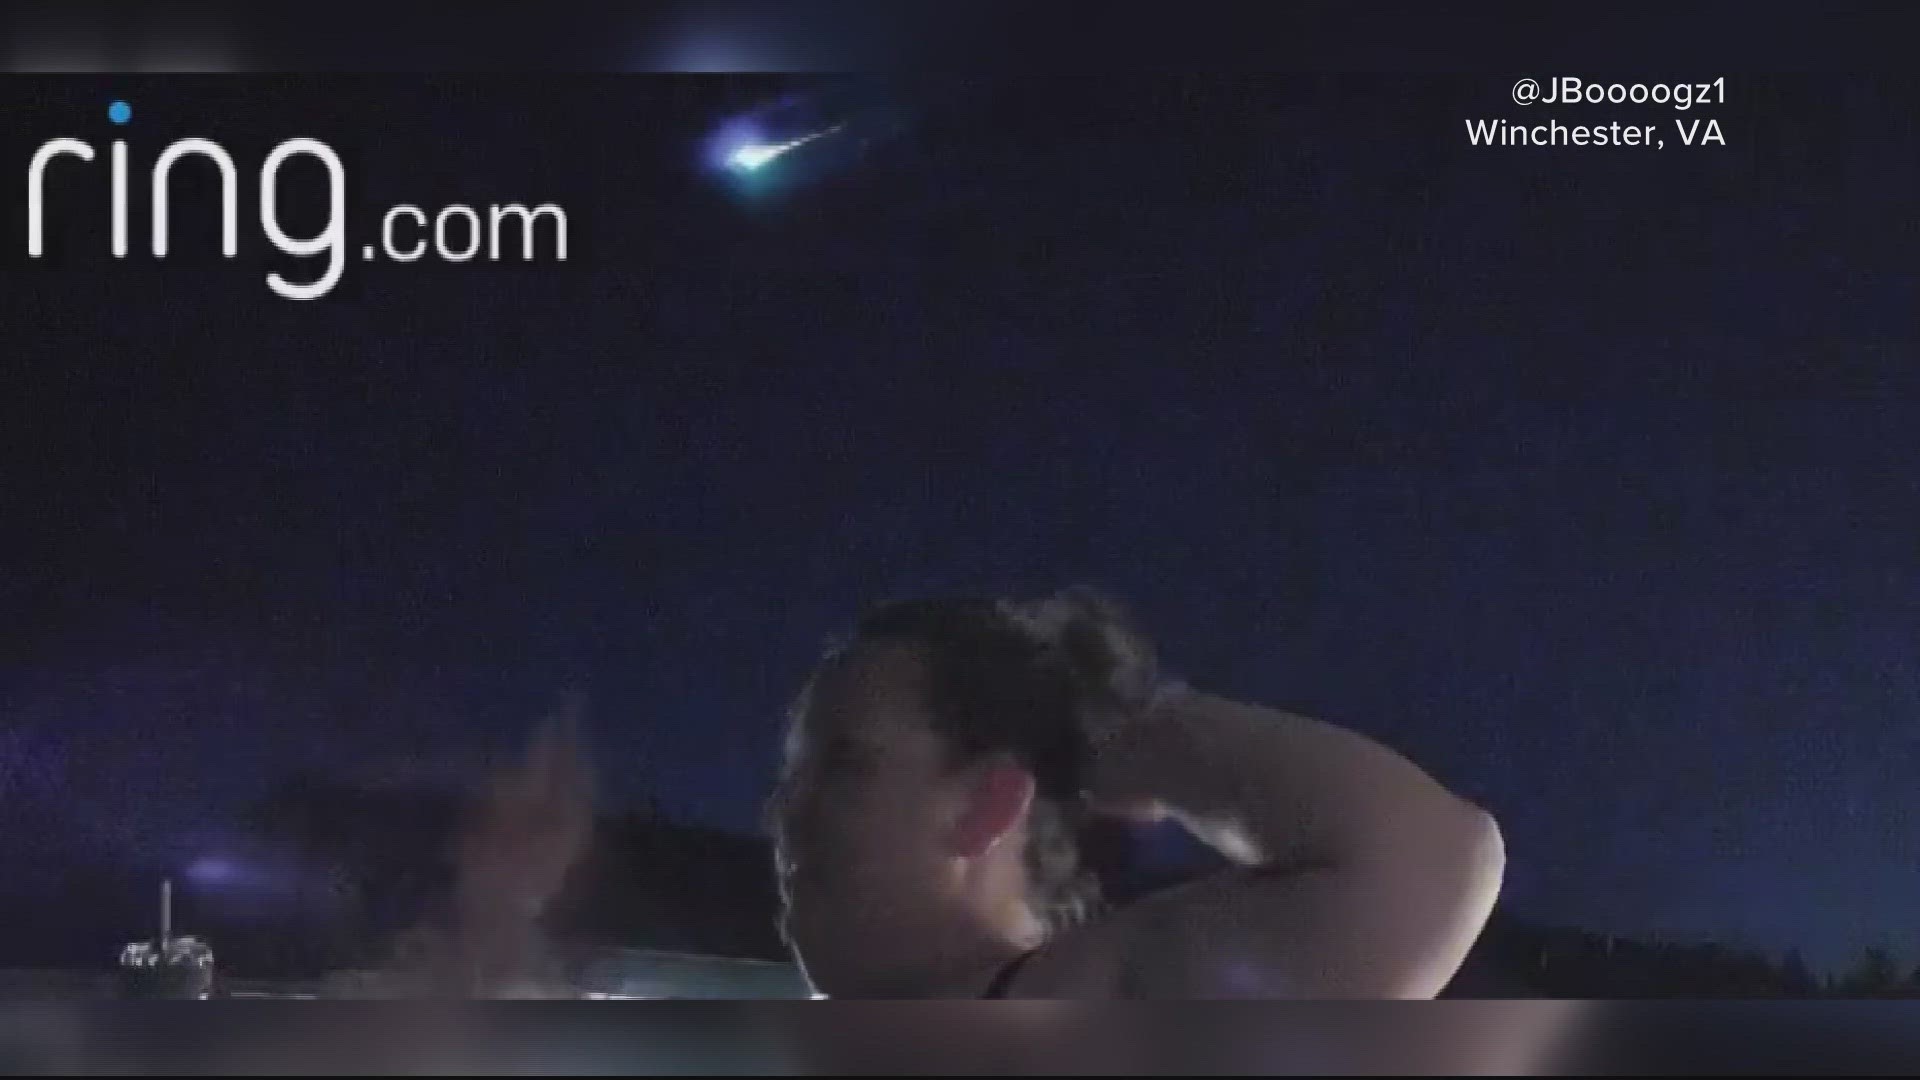 Many people in the DC region saw what appears to be a bright meteor streaking across the sky Sunday night.